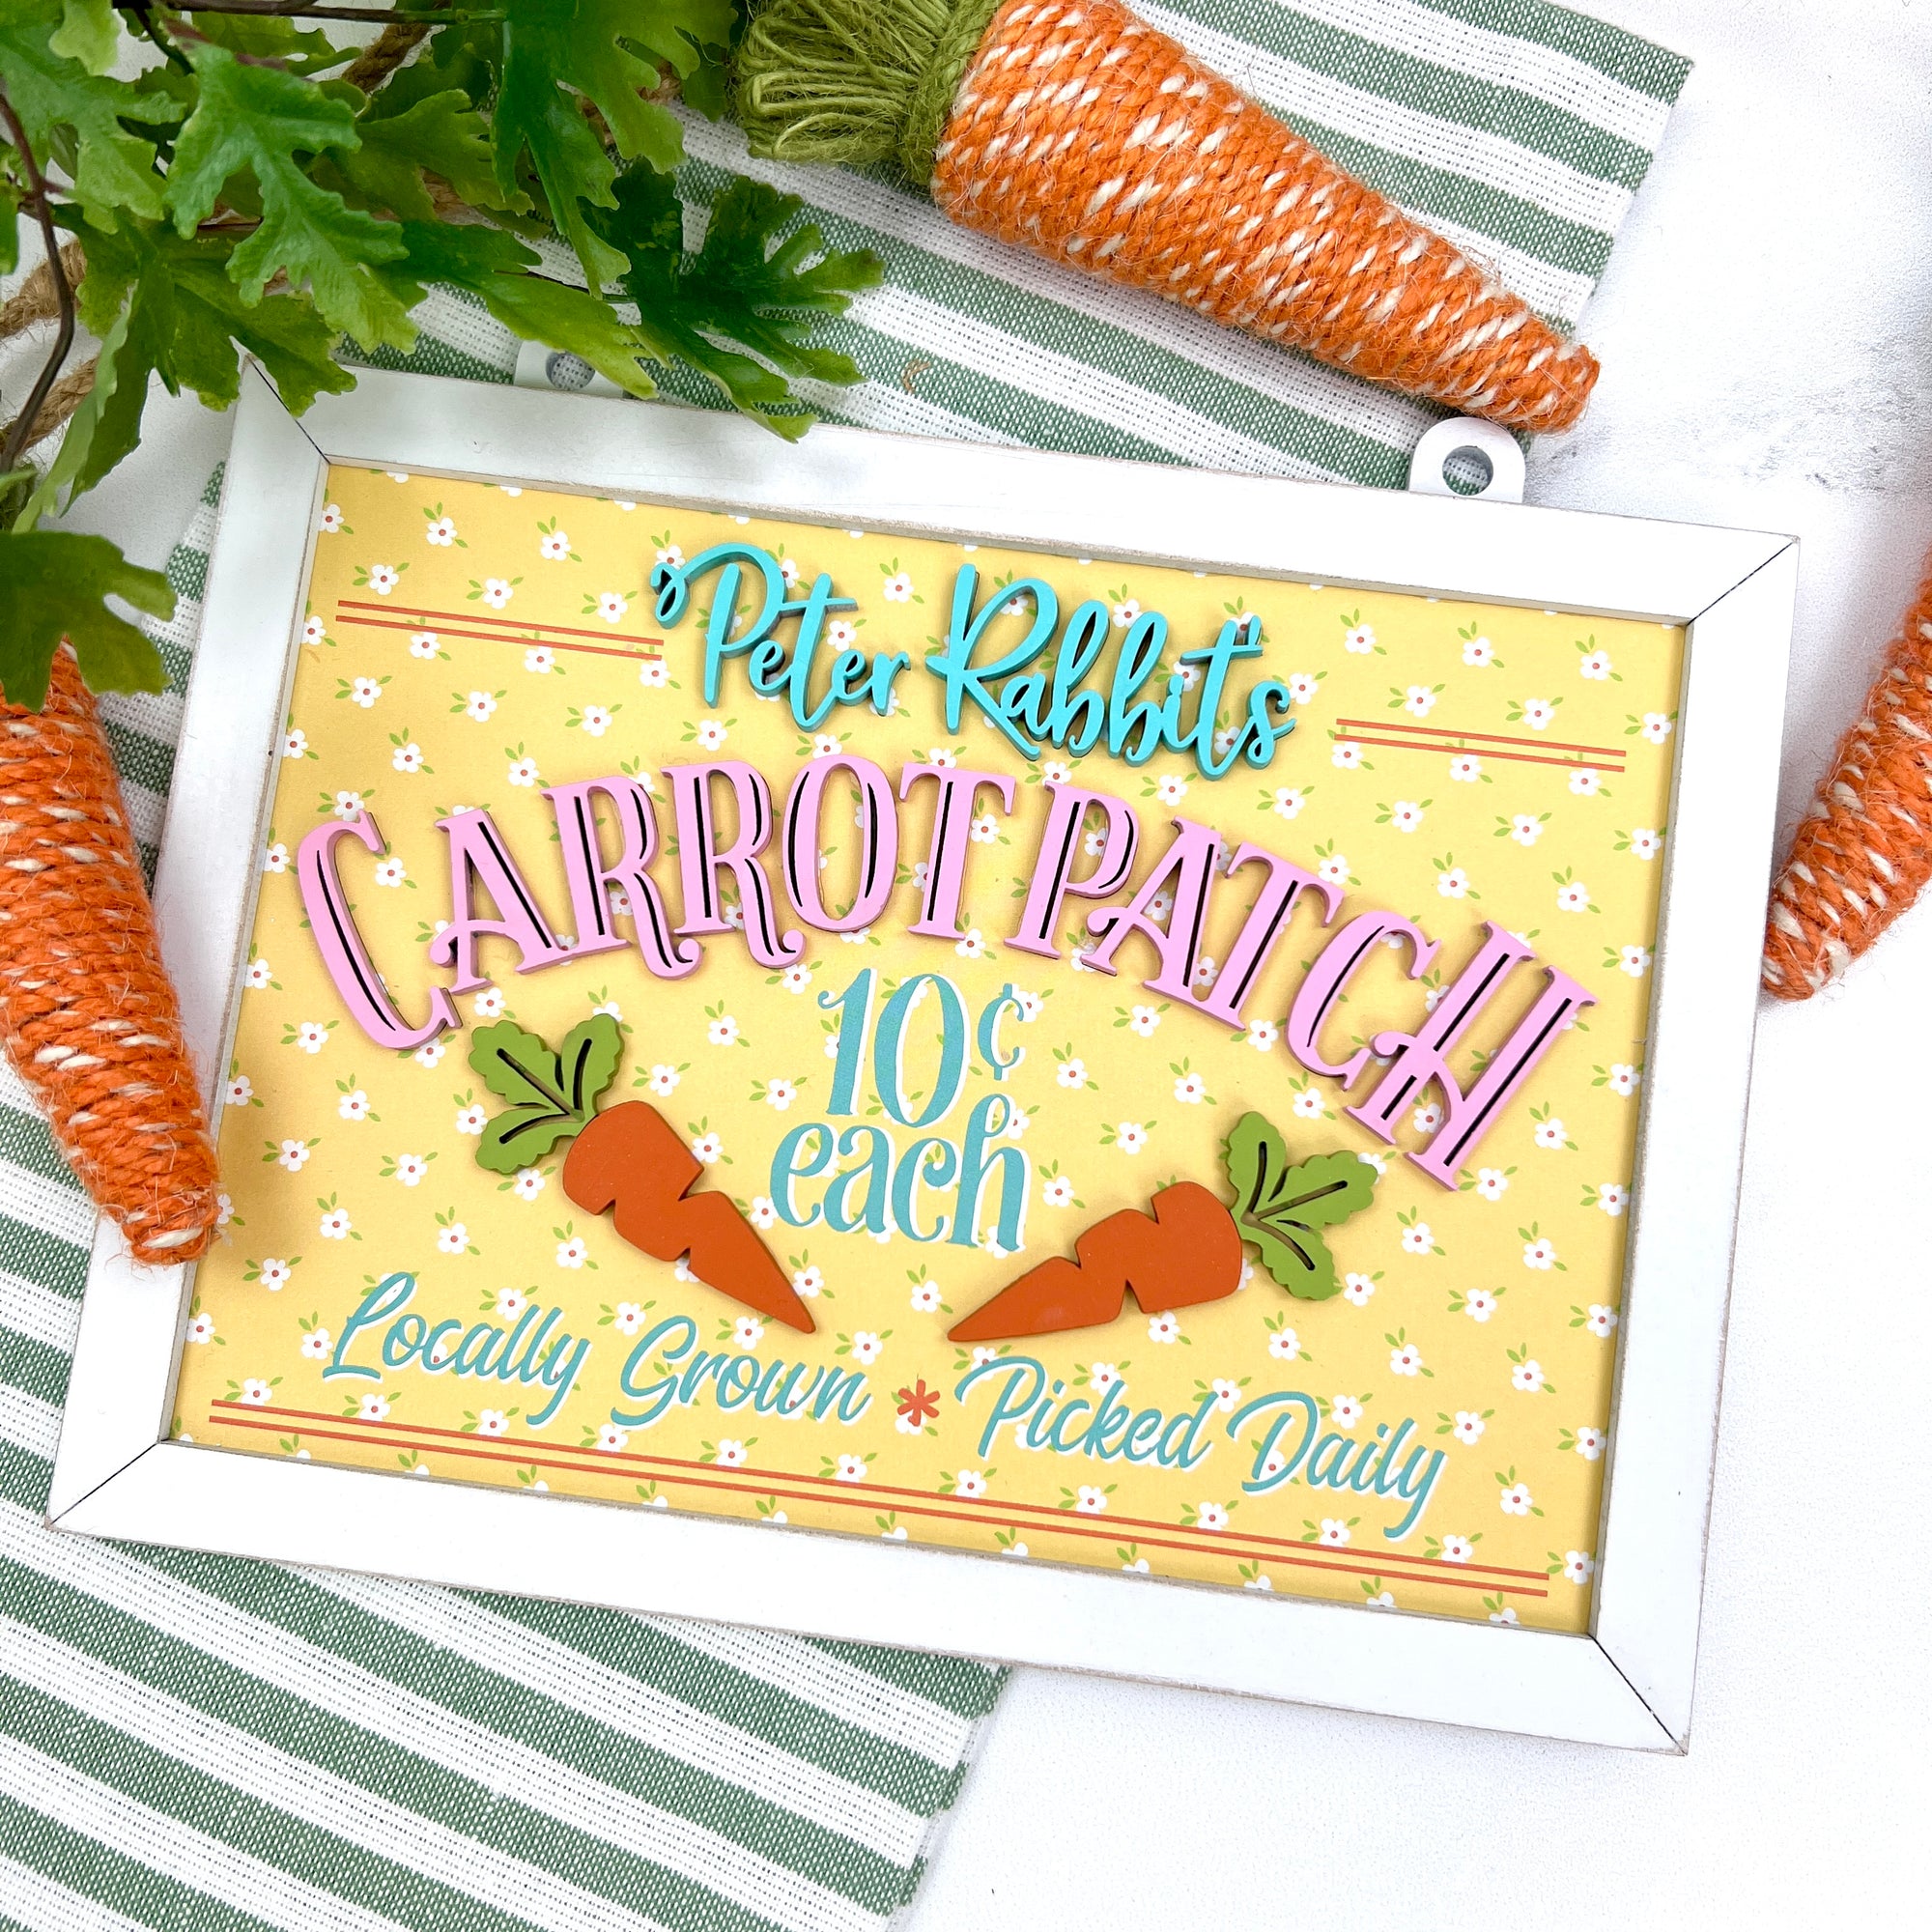 Pink, yellow, and teal Easter wood decor sign that says Peter Rabbits carrot patch